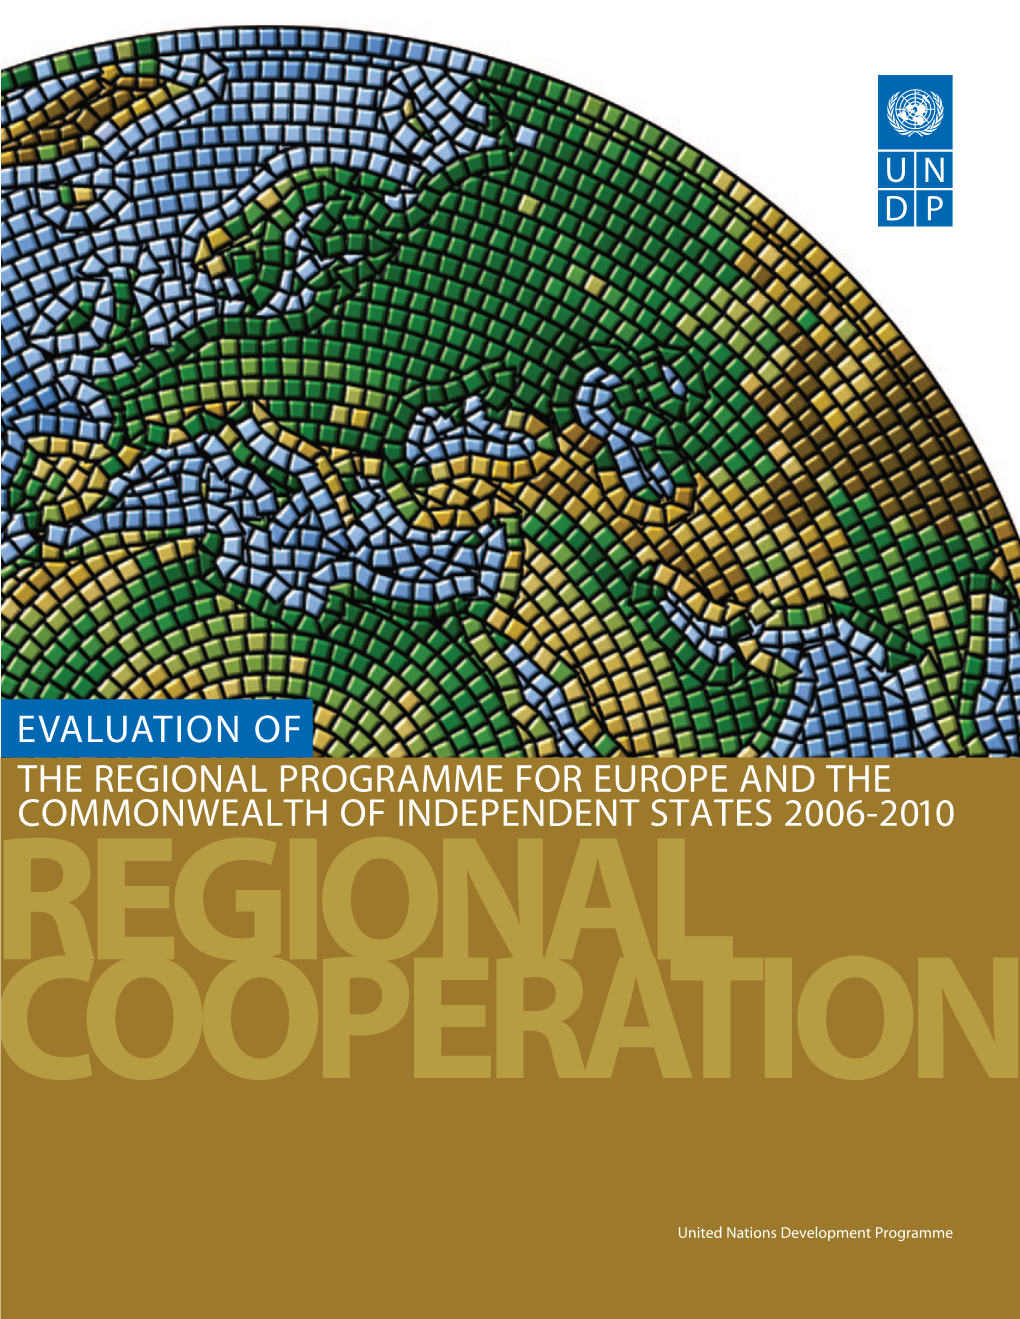 Evaluation of the Regional Programme for Europe and the CIS 2006-2010